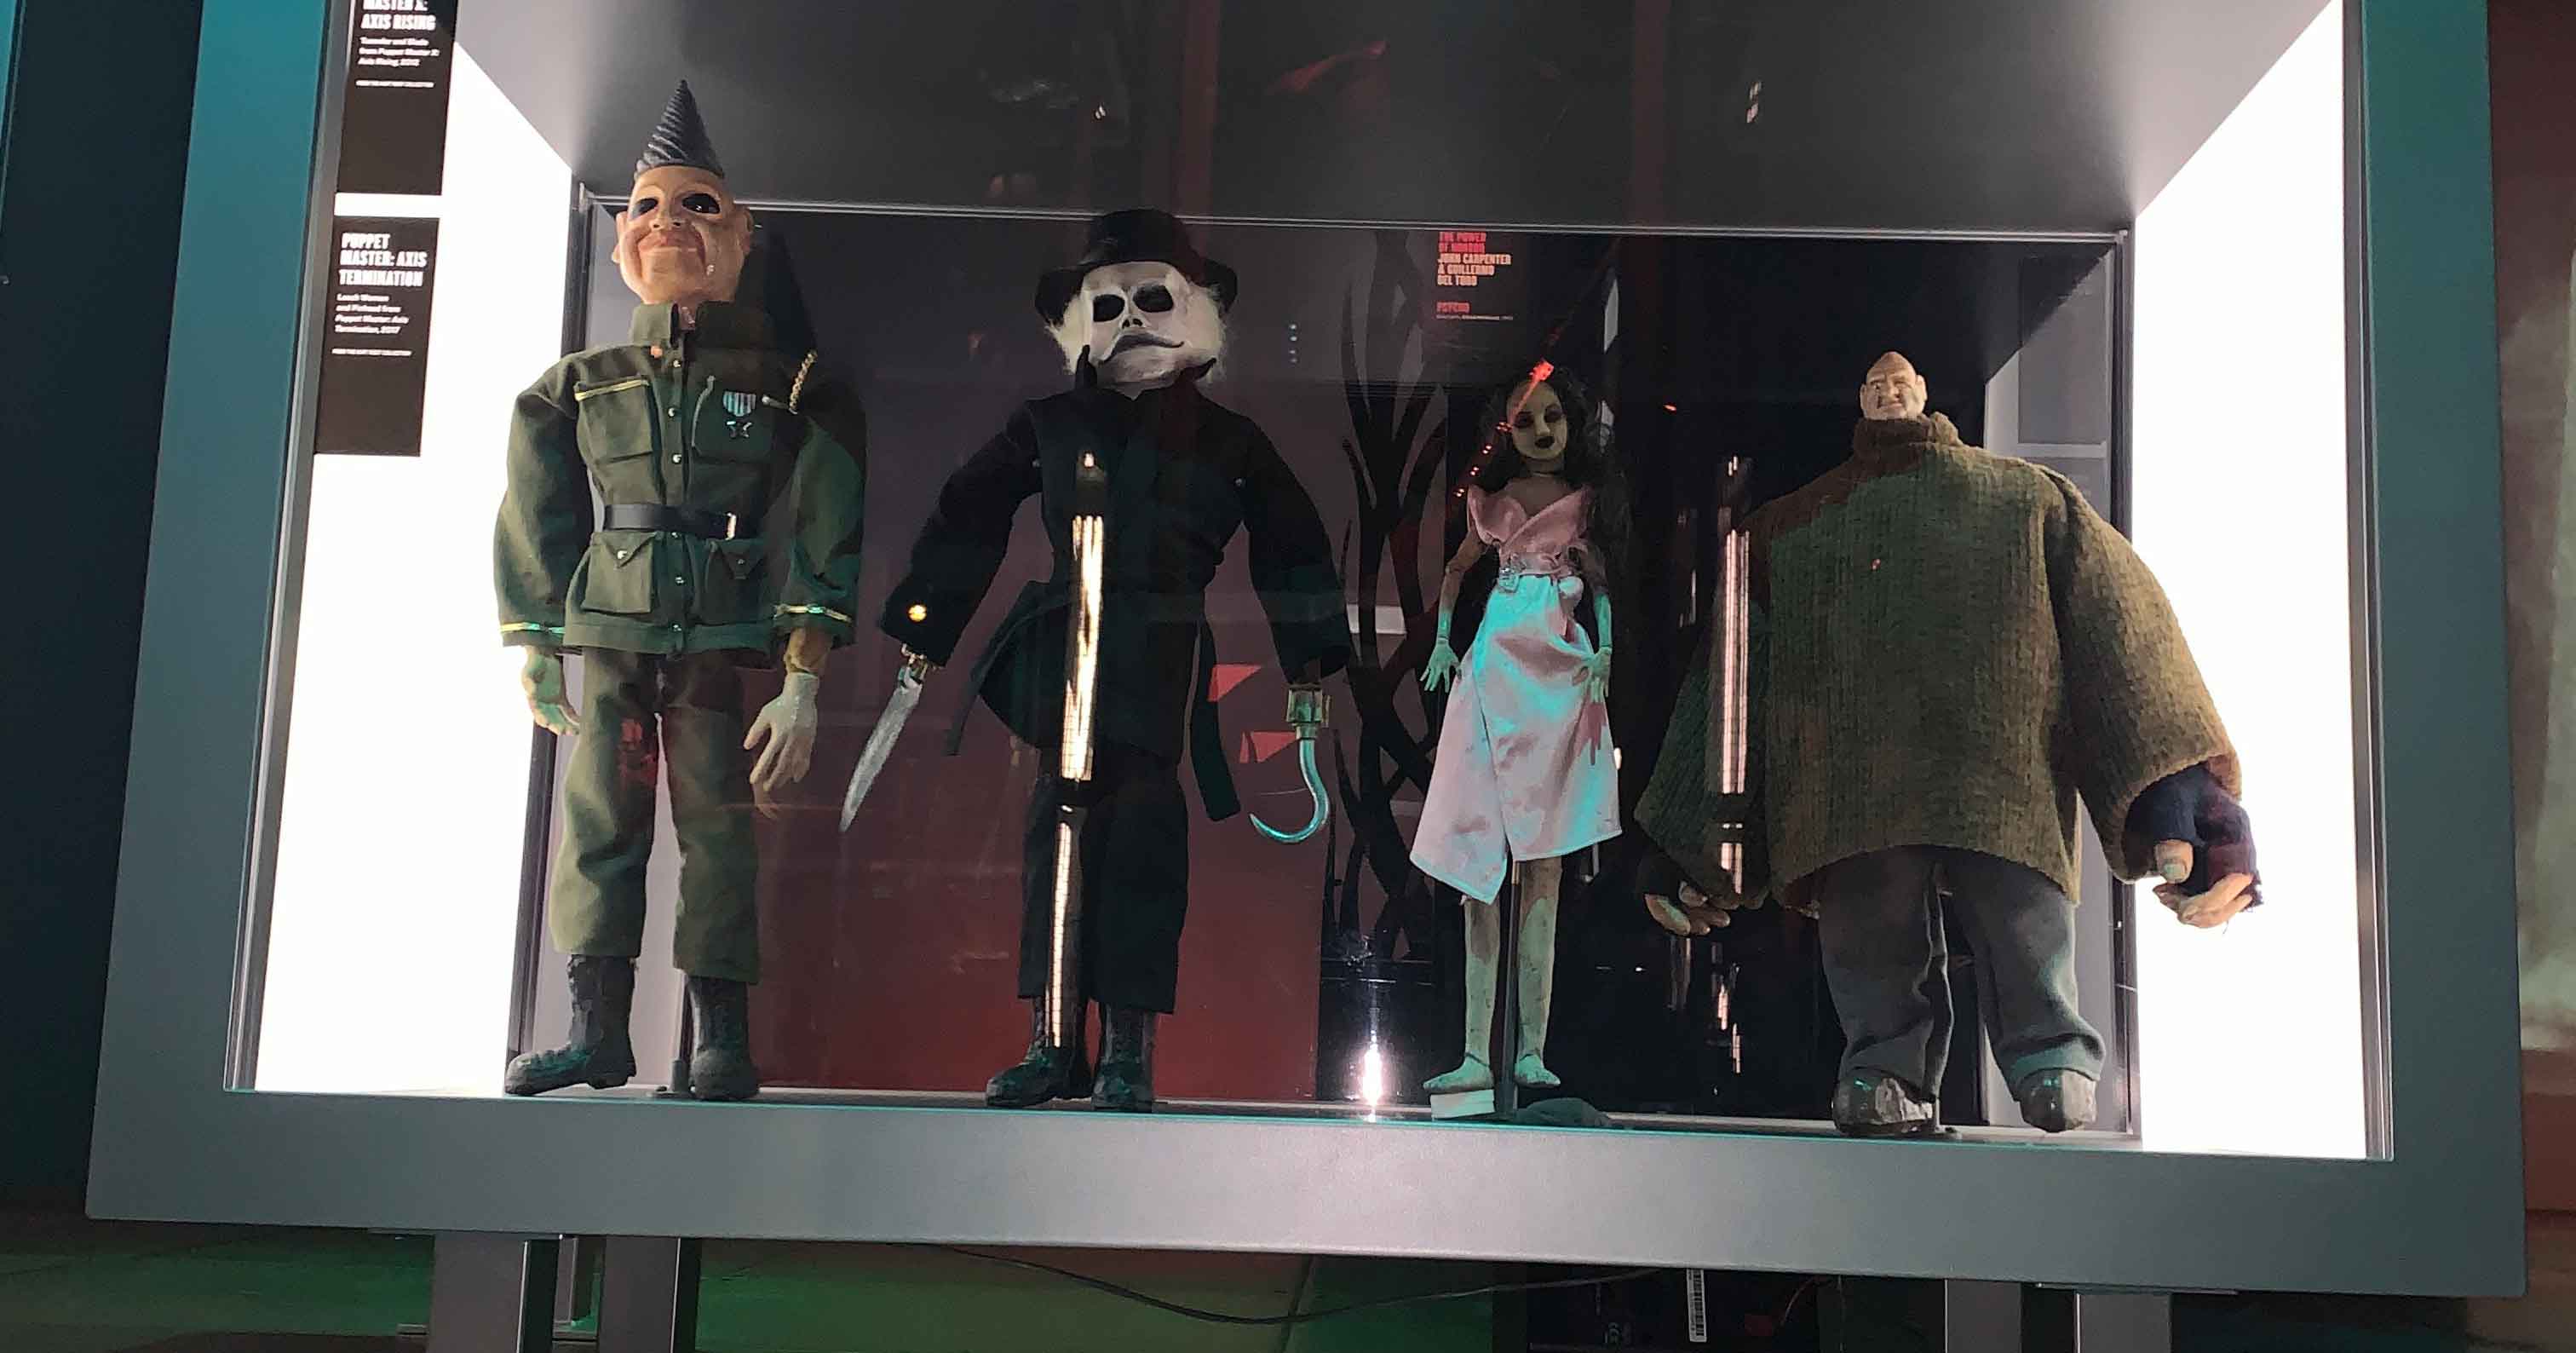 Puppet Master' Franchise Puppets Added to 'Scared to Death: The Thrill of  Horror Film' Exhibition at MoPOP | Museum of Pop Culture